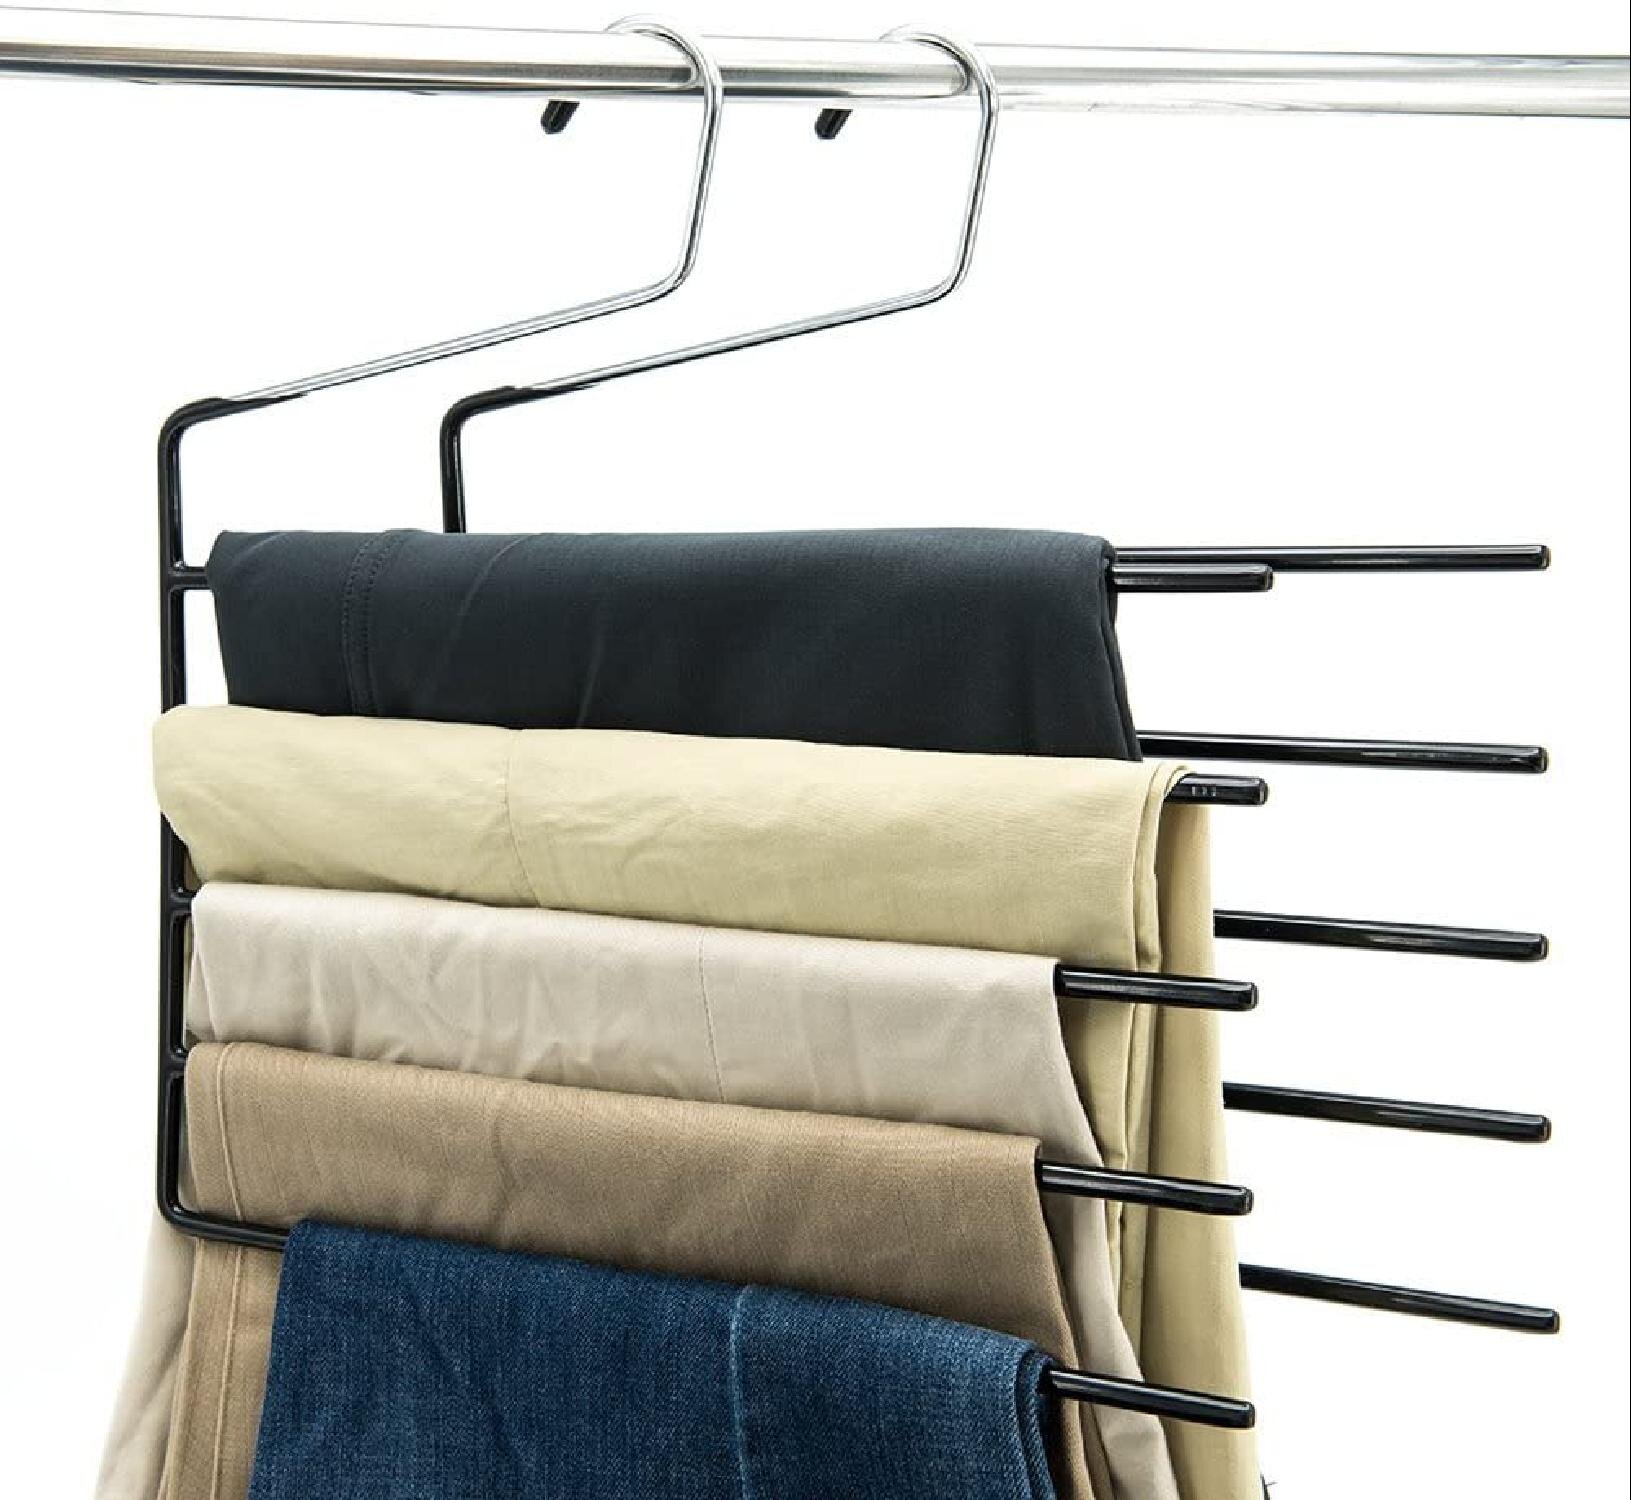 black High-Grade 5-Tier Trouser Hangers Strong & Durable Skirt Hangers Space Saving Heavy Duty Foldable Non Slip Multi Layer Hangers For Trousers And Scarves 